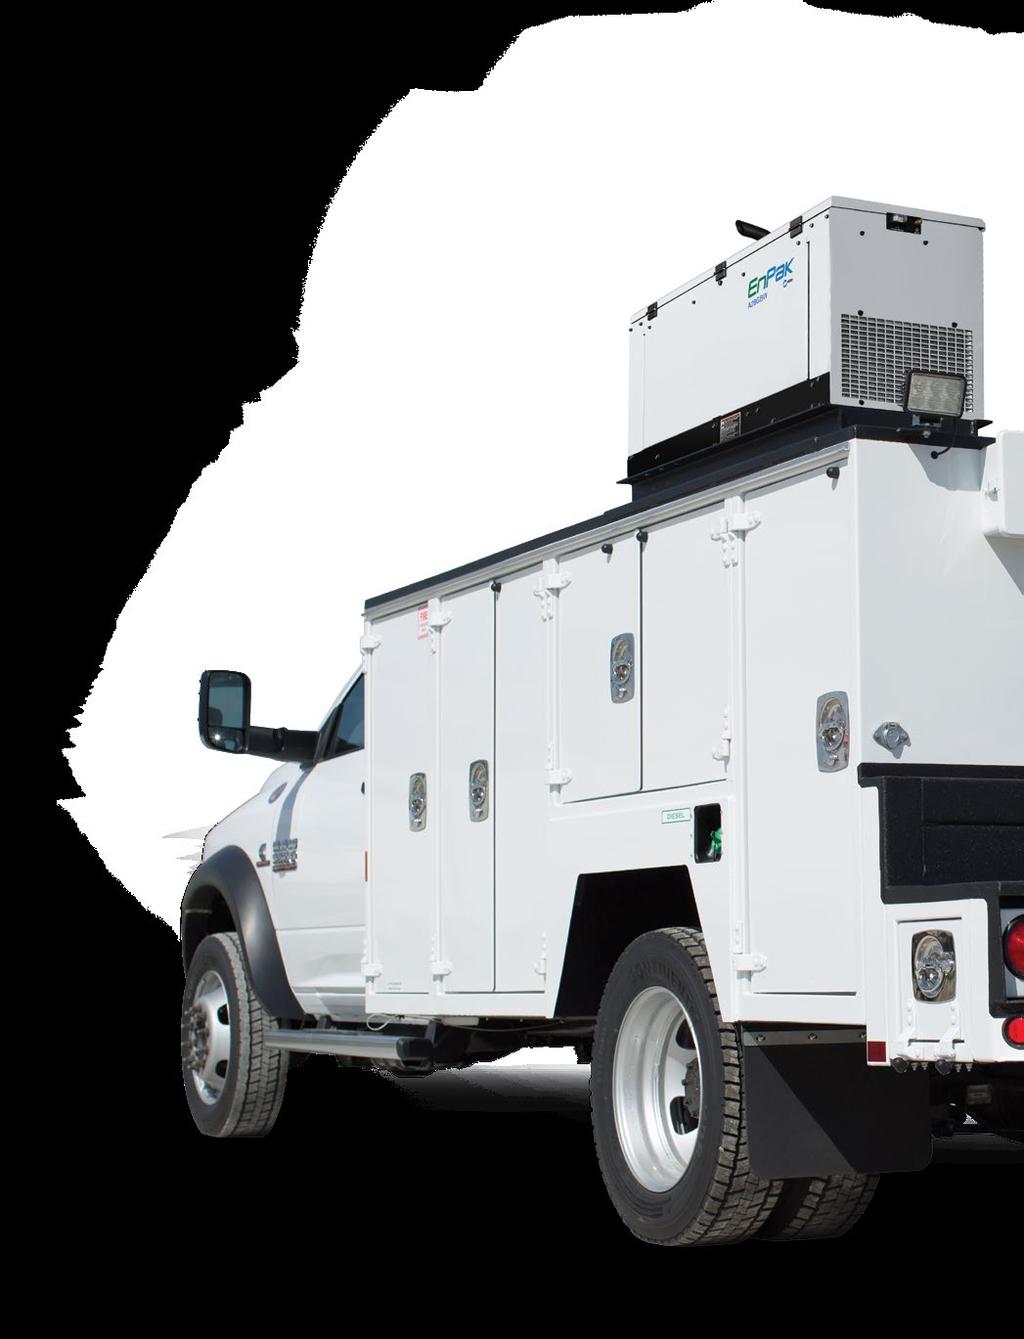 MILLER ENPAK A28GBW: THE WORK TRUCK SOLUTION More capabilities 28 cfm compressed air Compact design Virtually any air tool can be efficiently powered by the EnPak A28 s